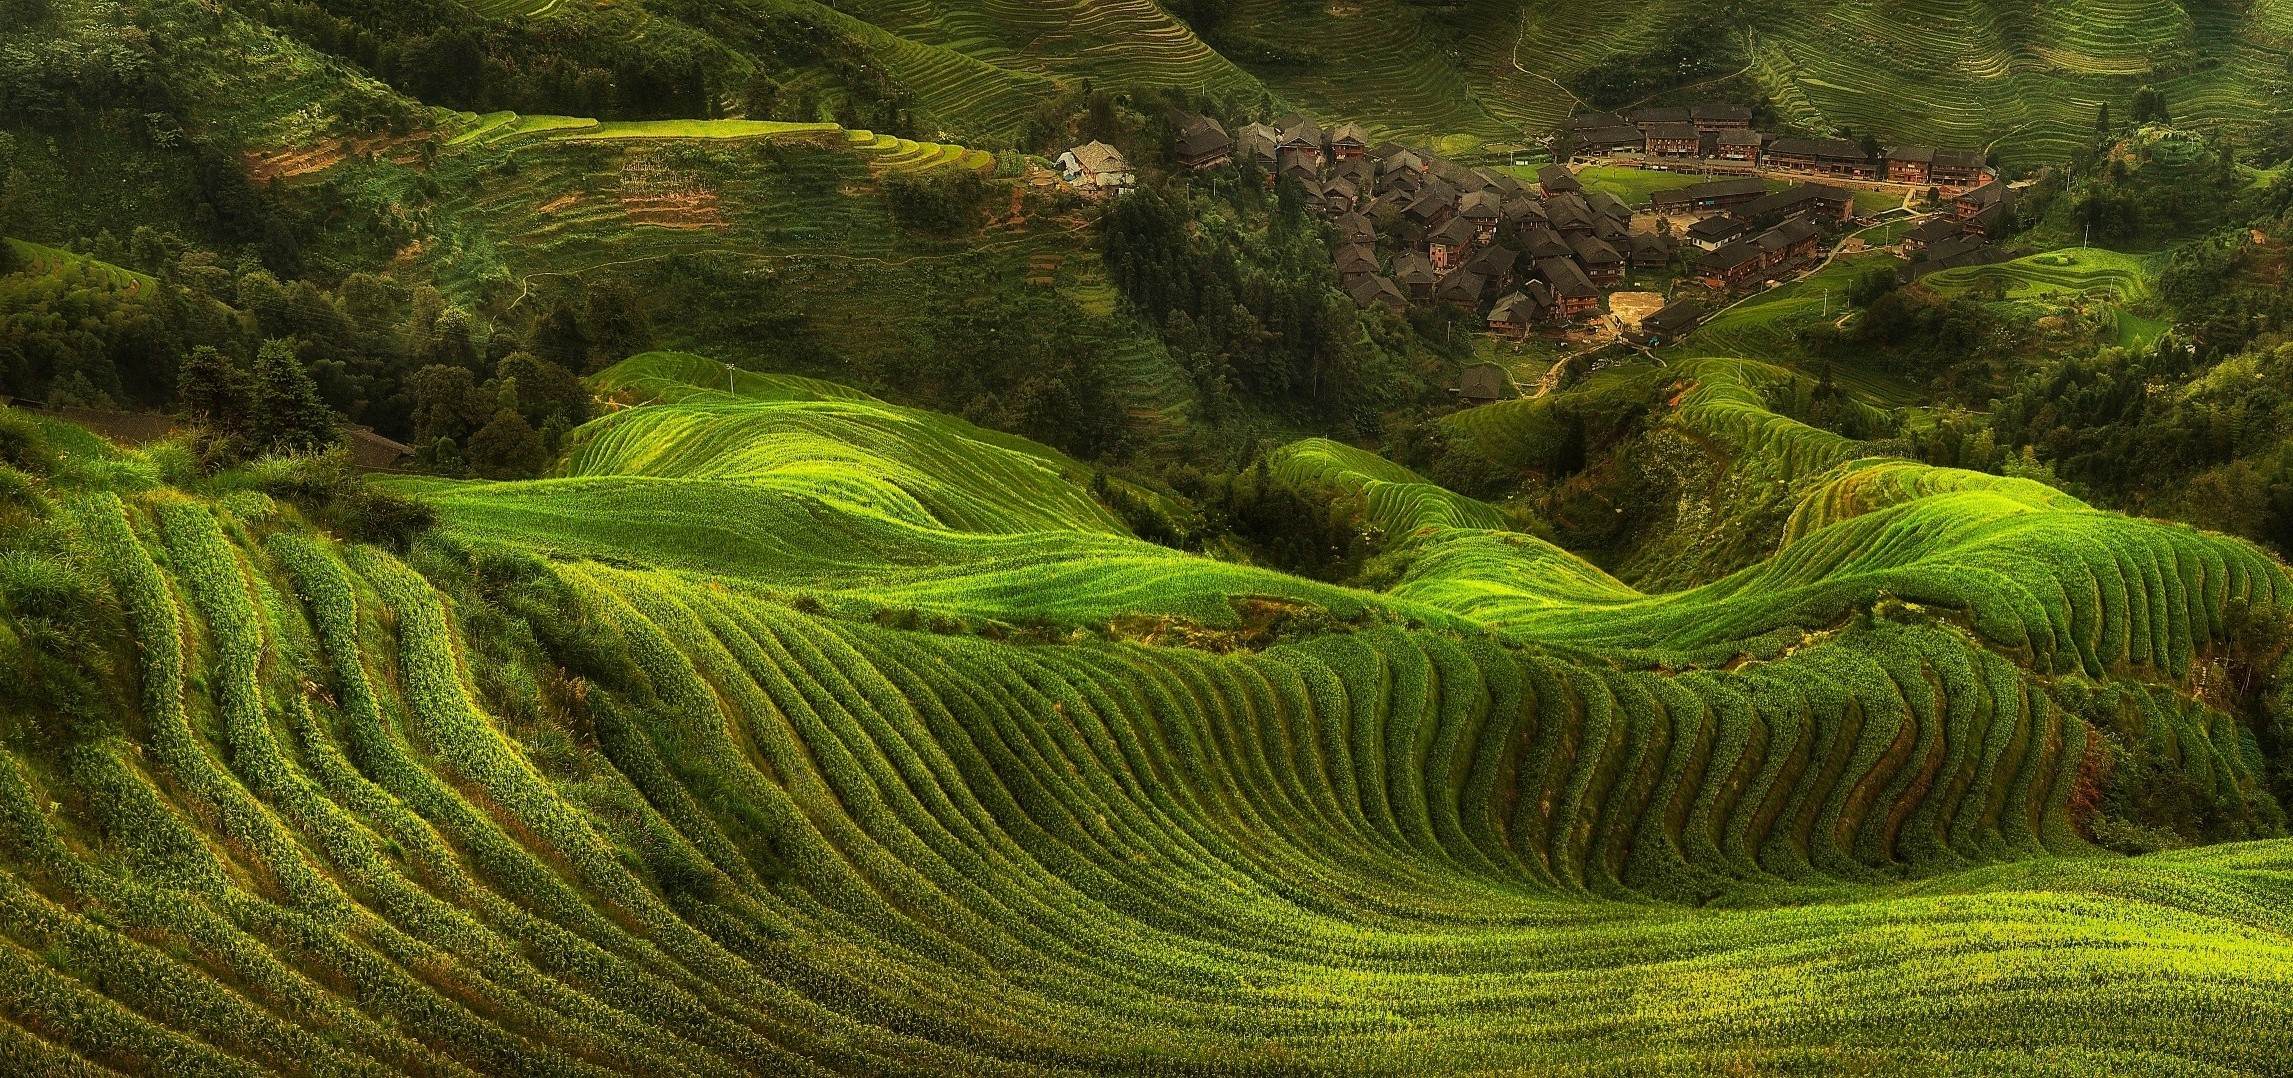 field, Rice Paddy, Terraces, Villages, Hill, Green, Trees, Landscape, Nature Wallpaper